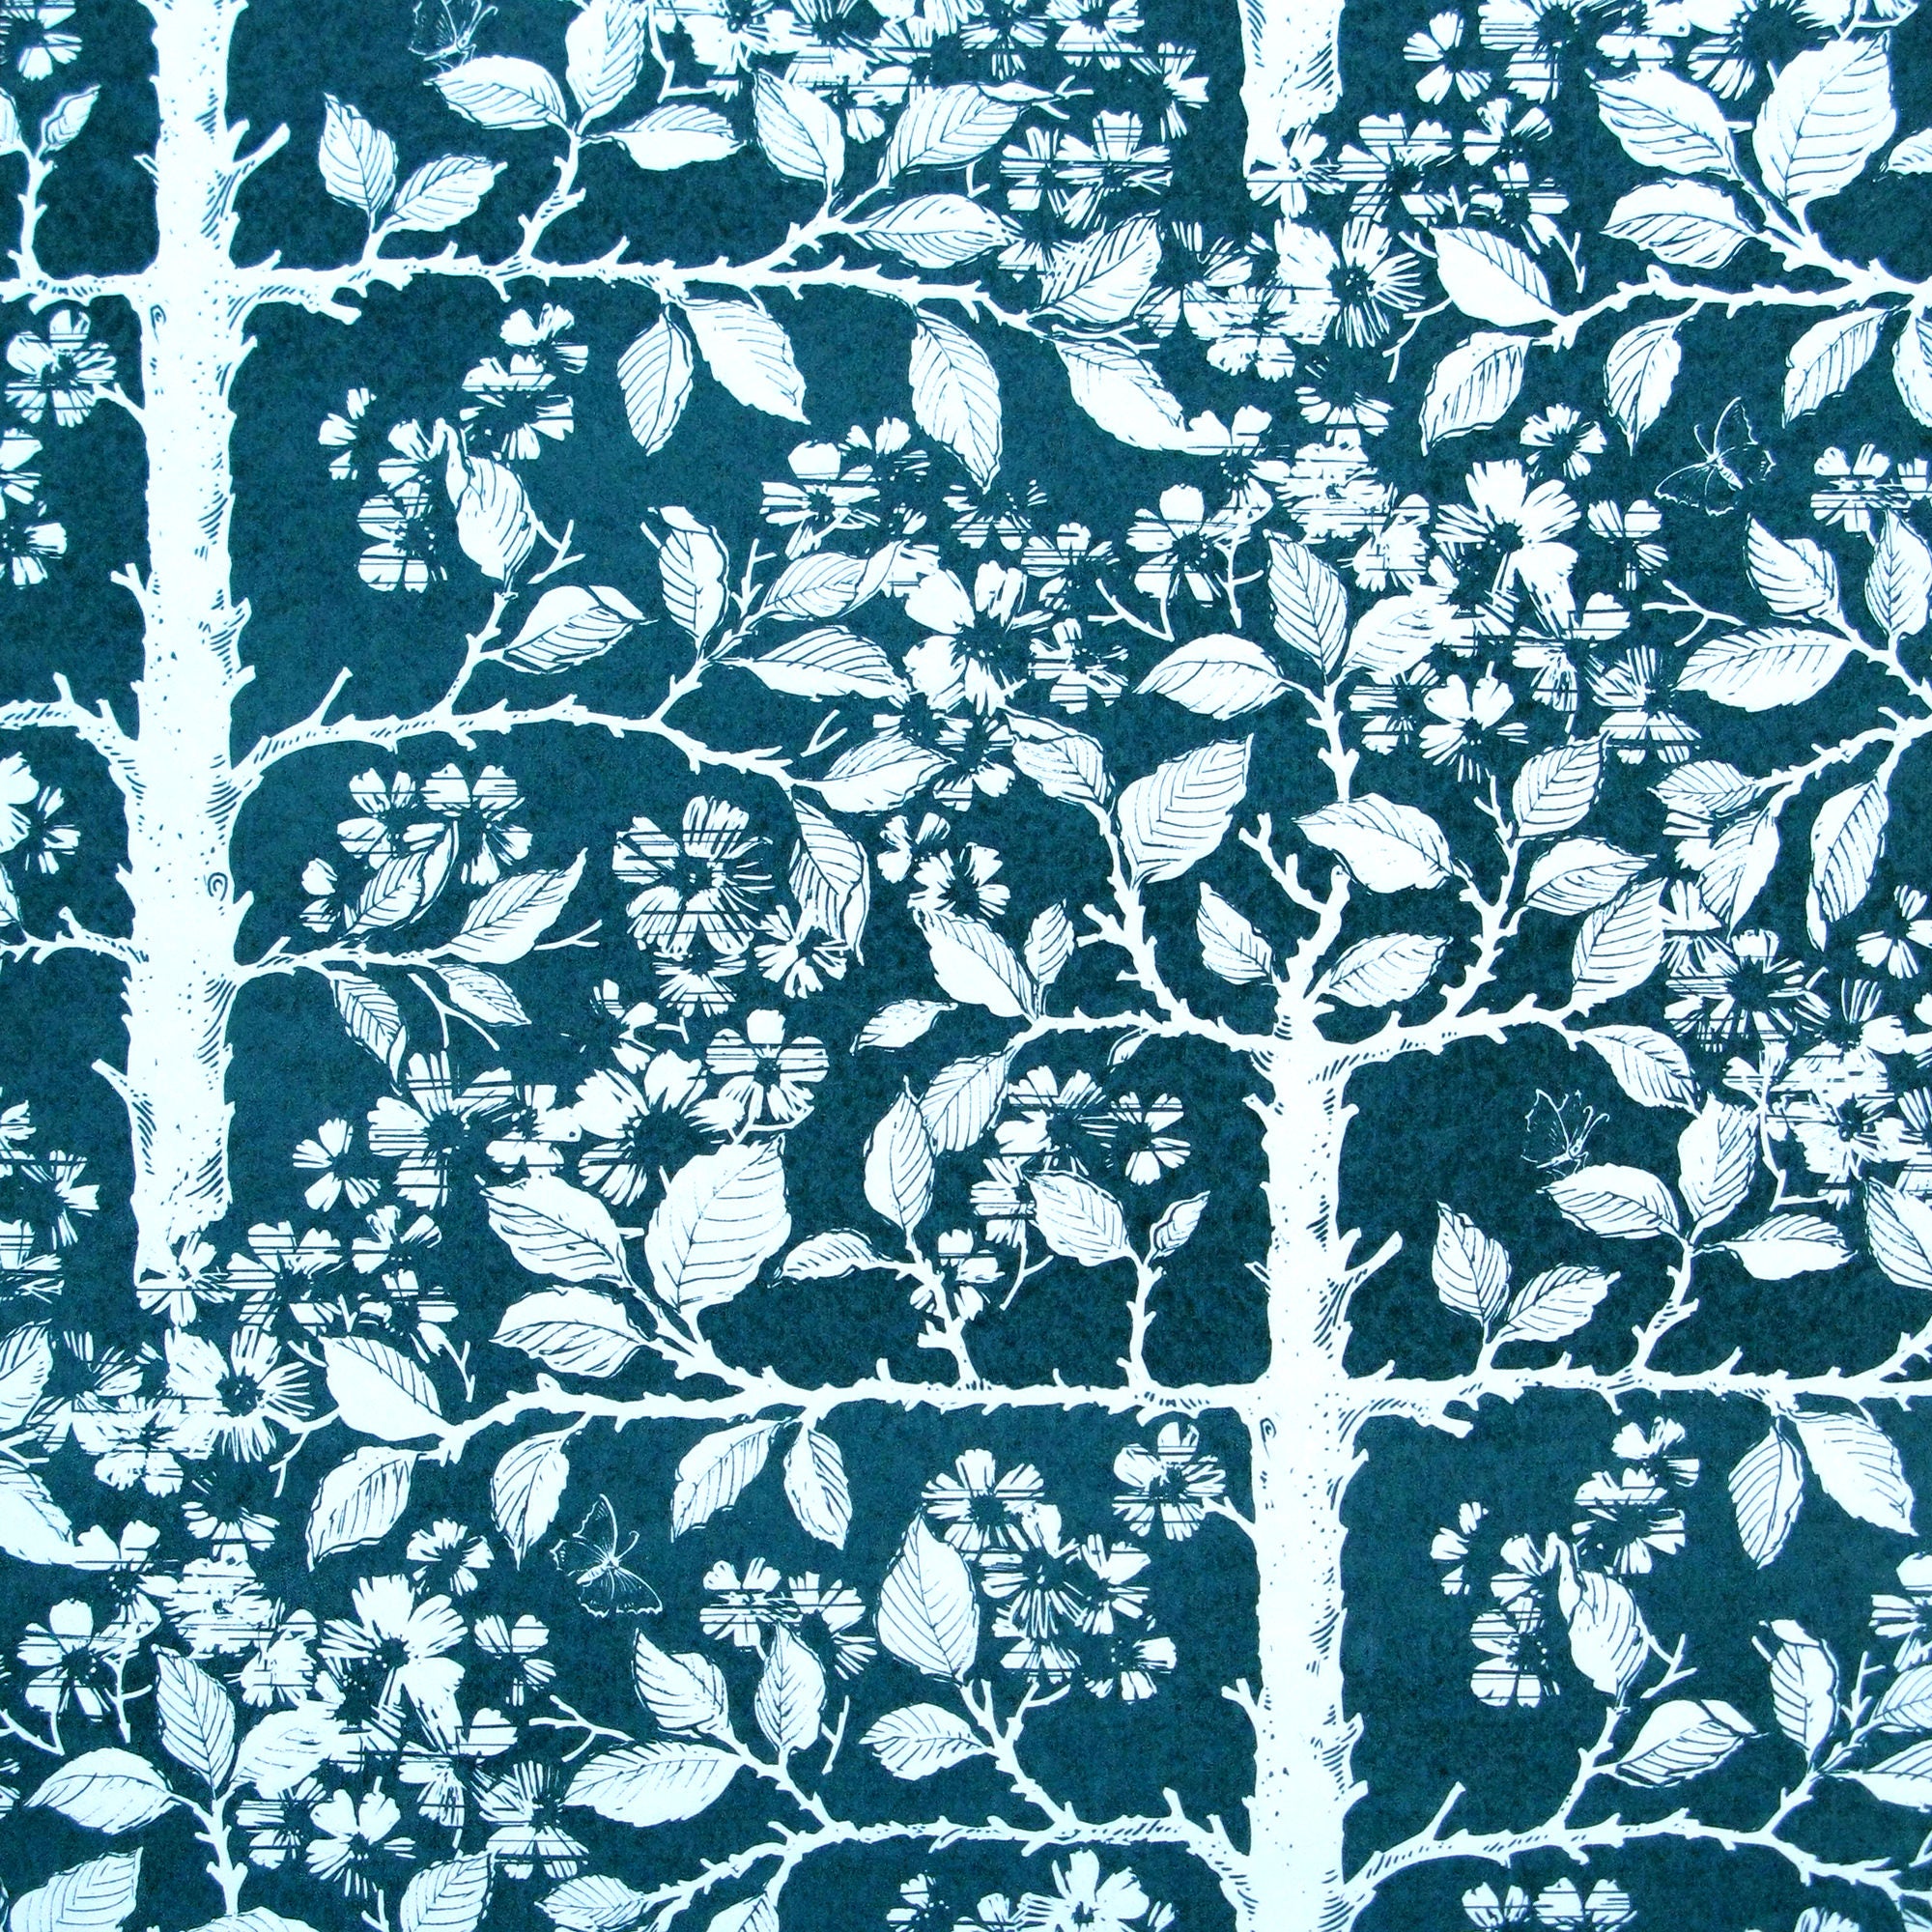 Detail of wallpaper in a large-scale tree and leaf print in white on an indigo field.